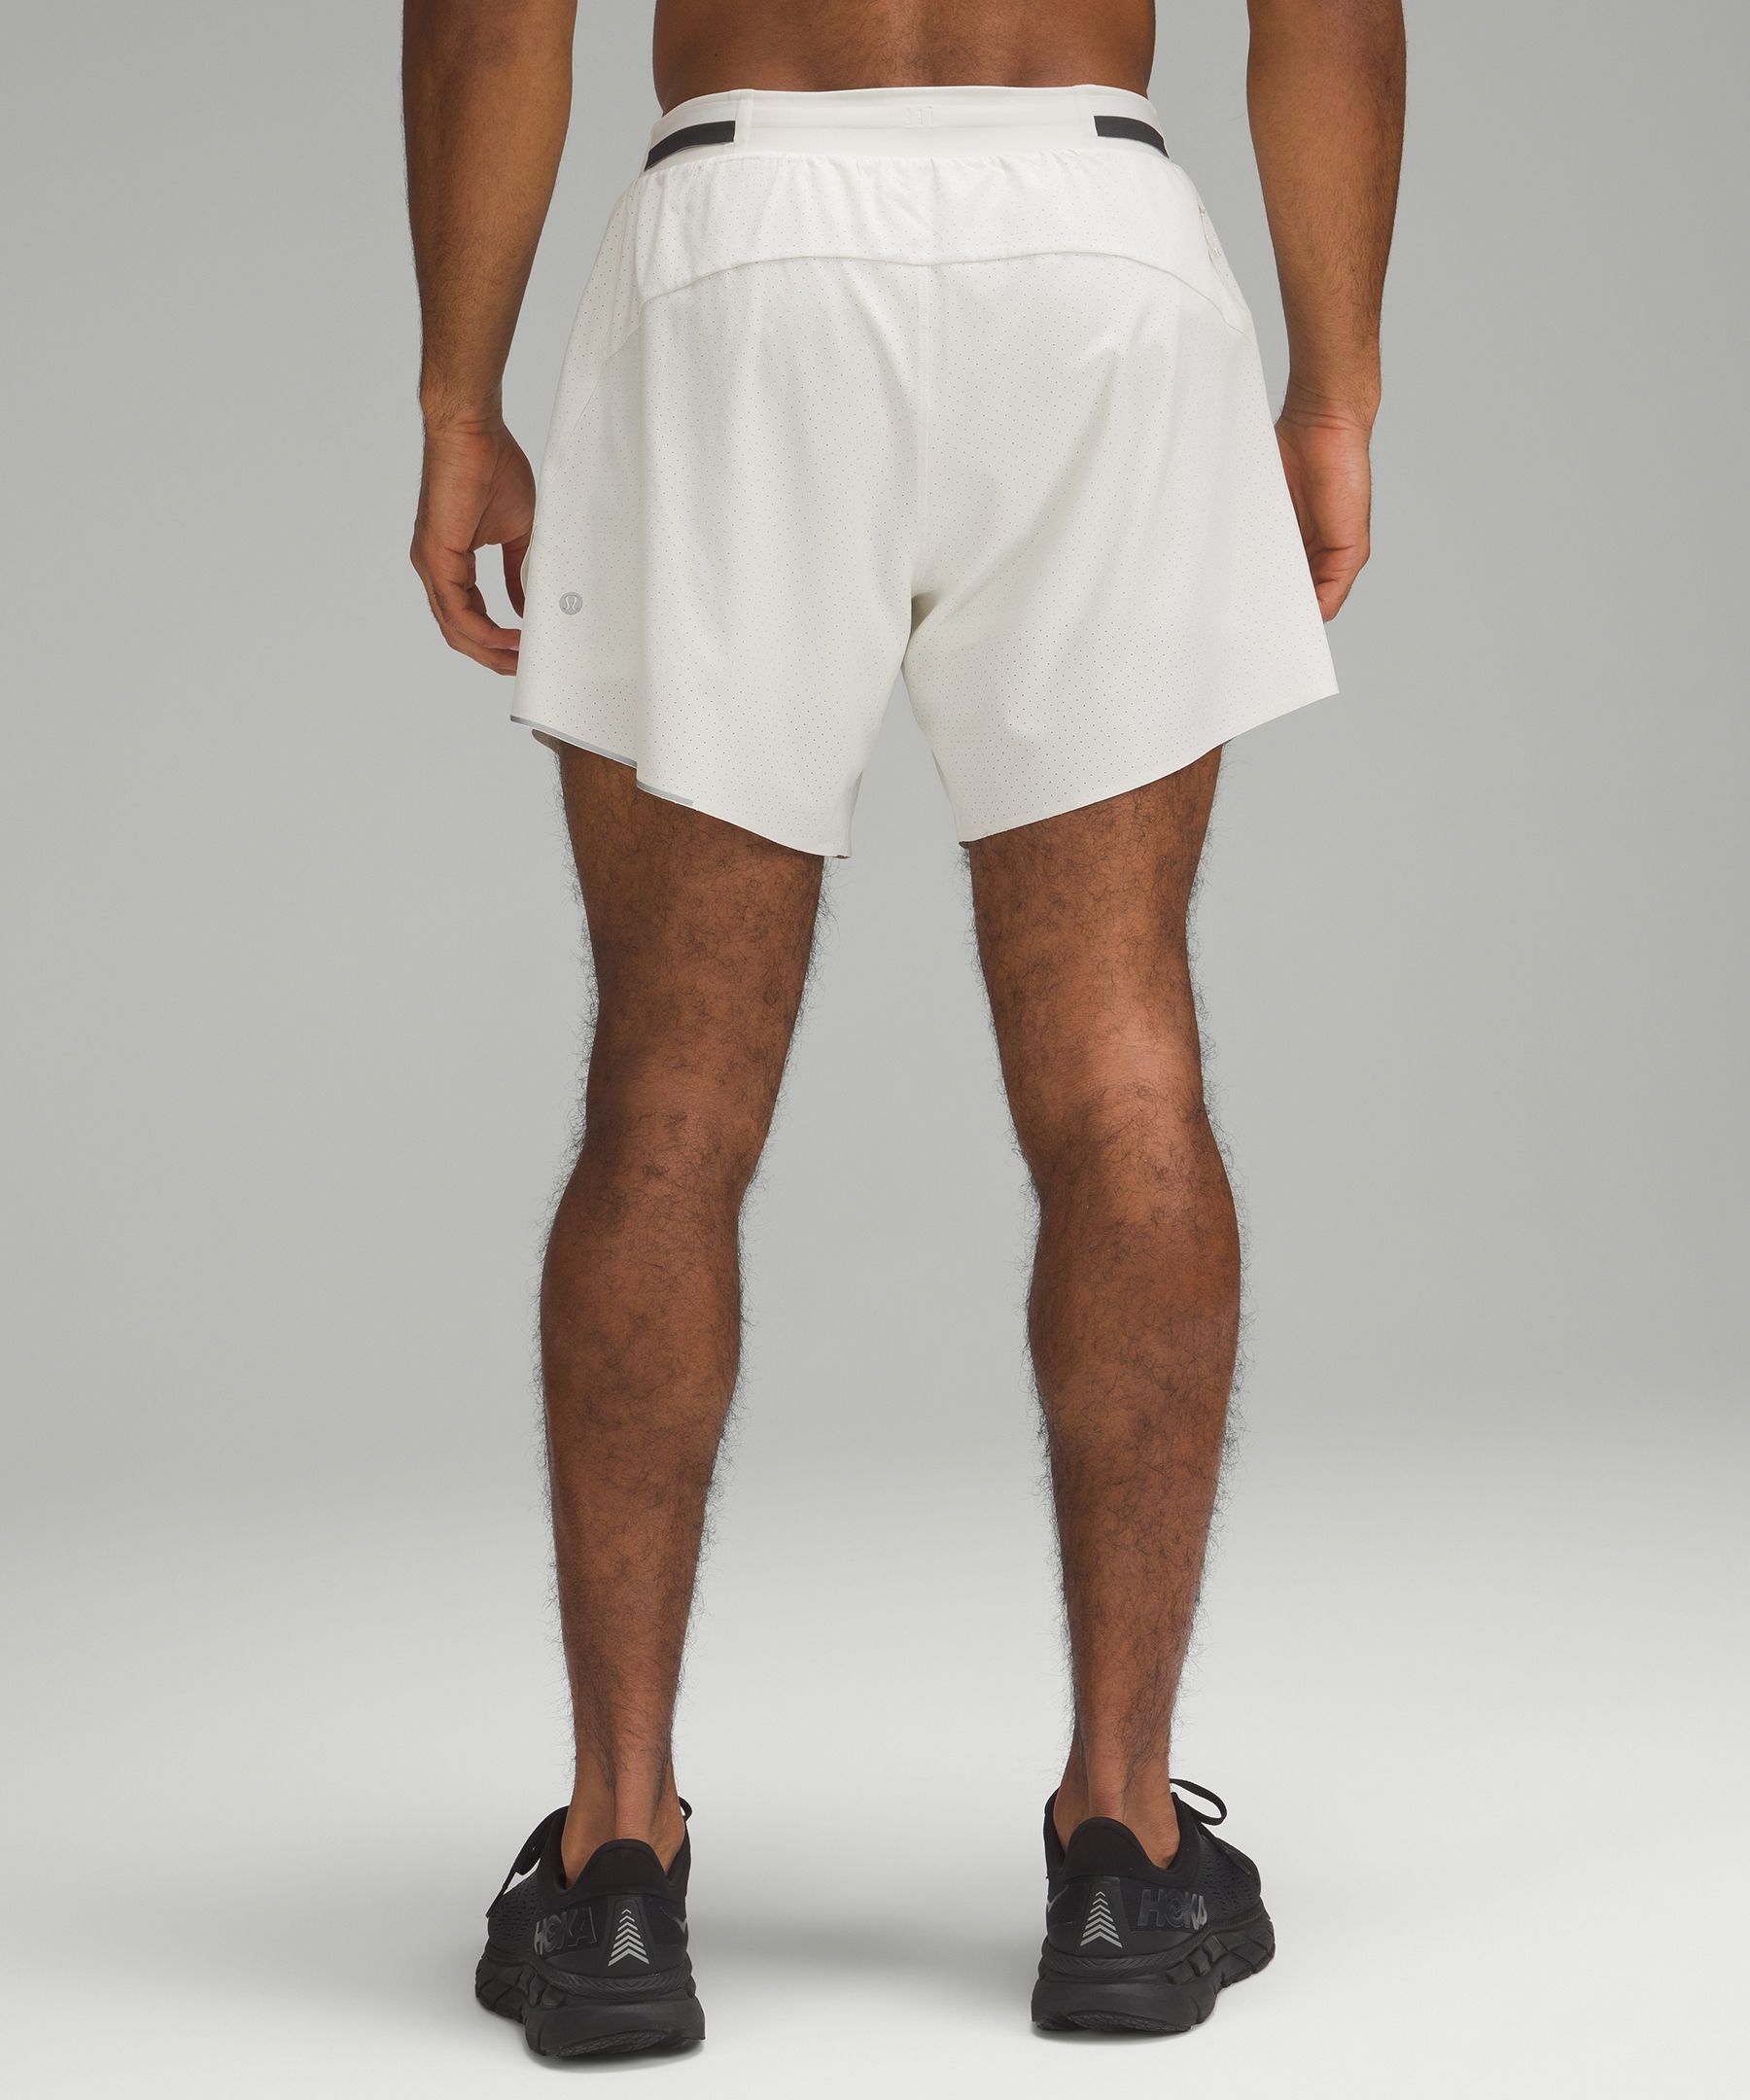 Fast and Free Lined Short 6, Men's Shorts